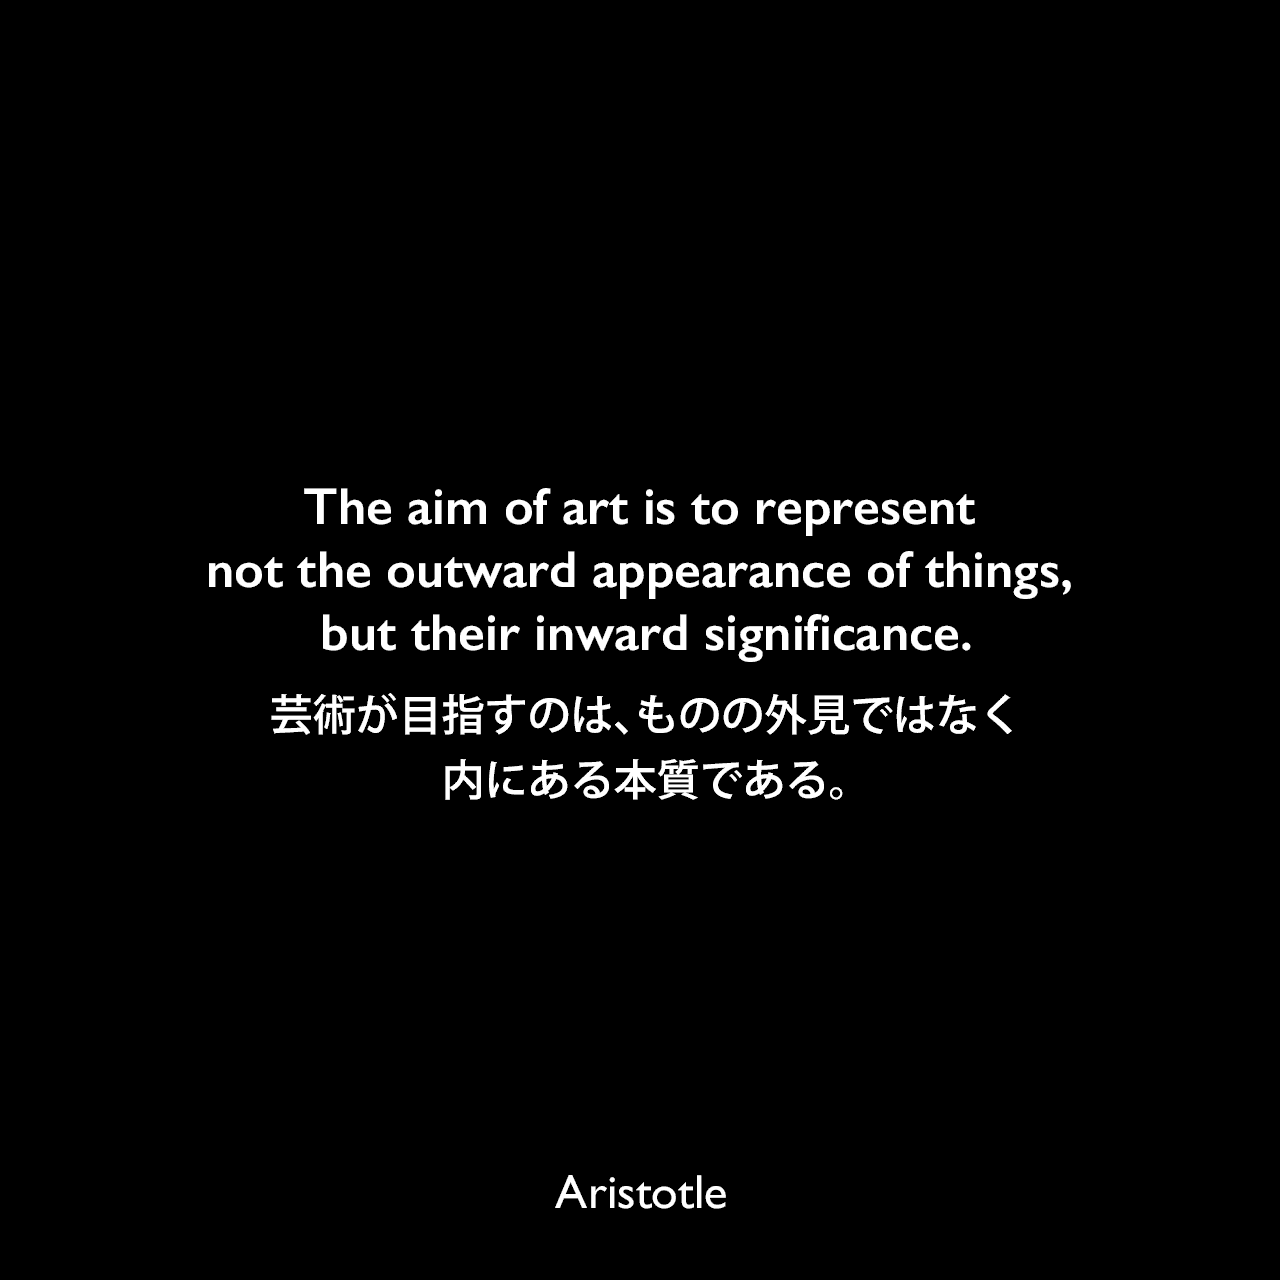 The aim of art is to represent not the outward appearance of things, but their inward significance.芸術が目指すのは、ものの外見ではなく、内にある本質である。Aristotle